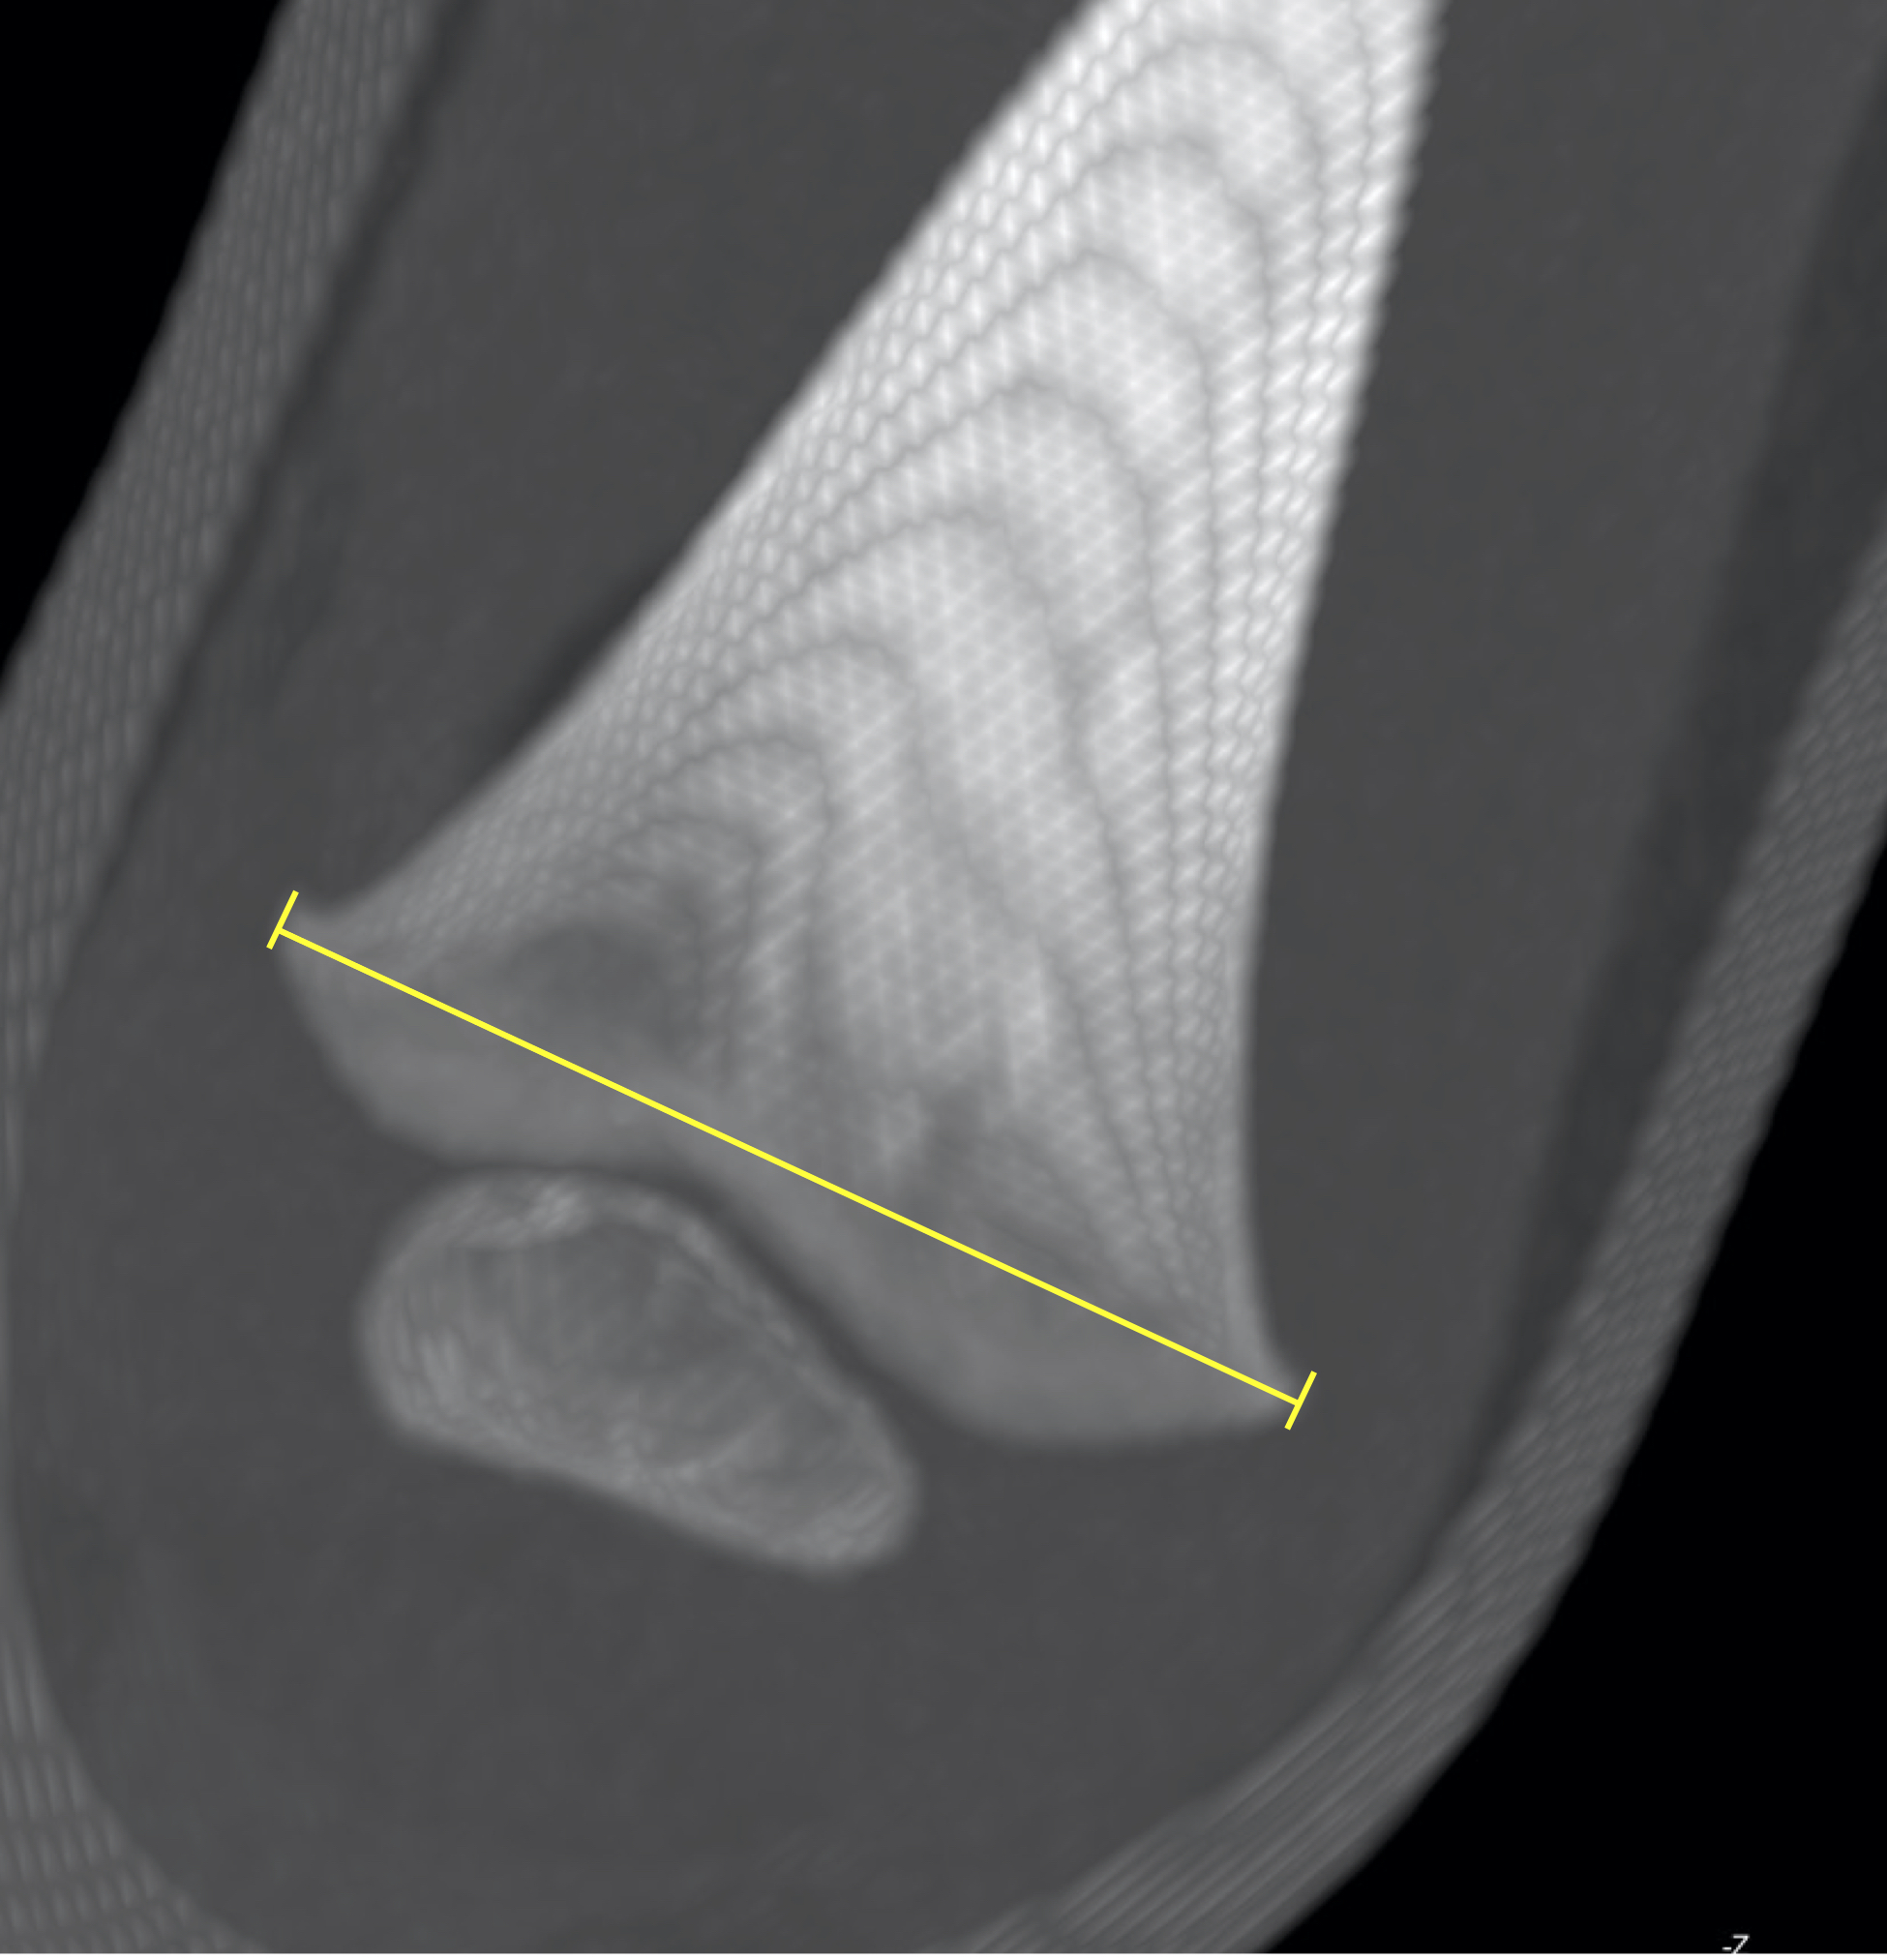 Illustration measurement of the distal femoral metaphysis in a CT scan